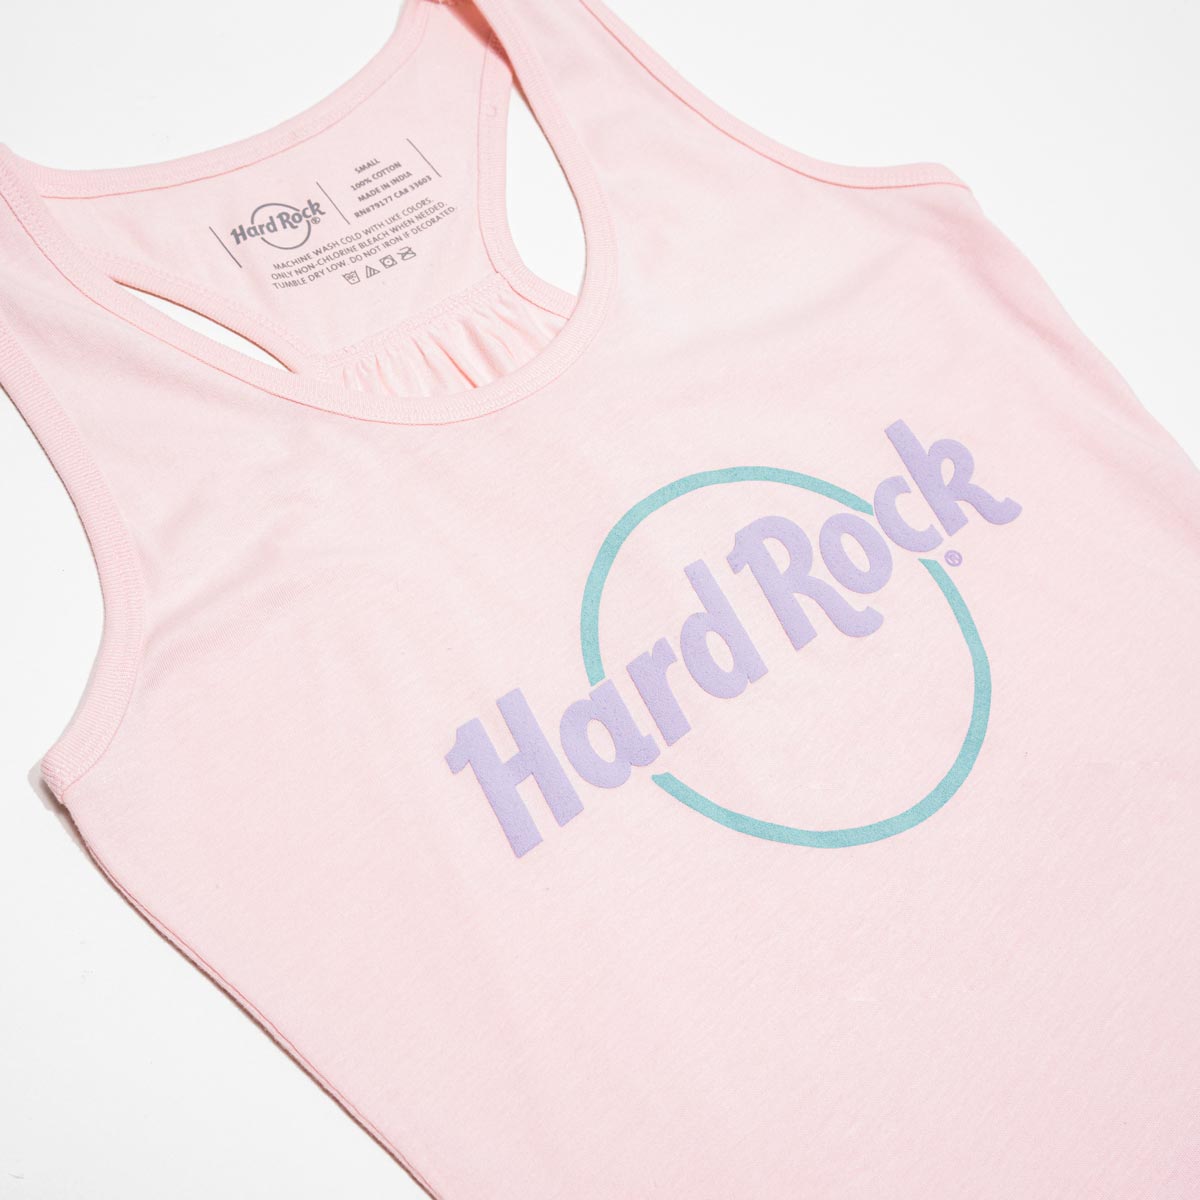 Hard Rock Pop of Color Tank Top in Plush Pink image number 2